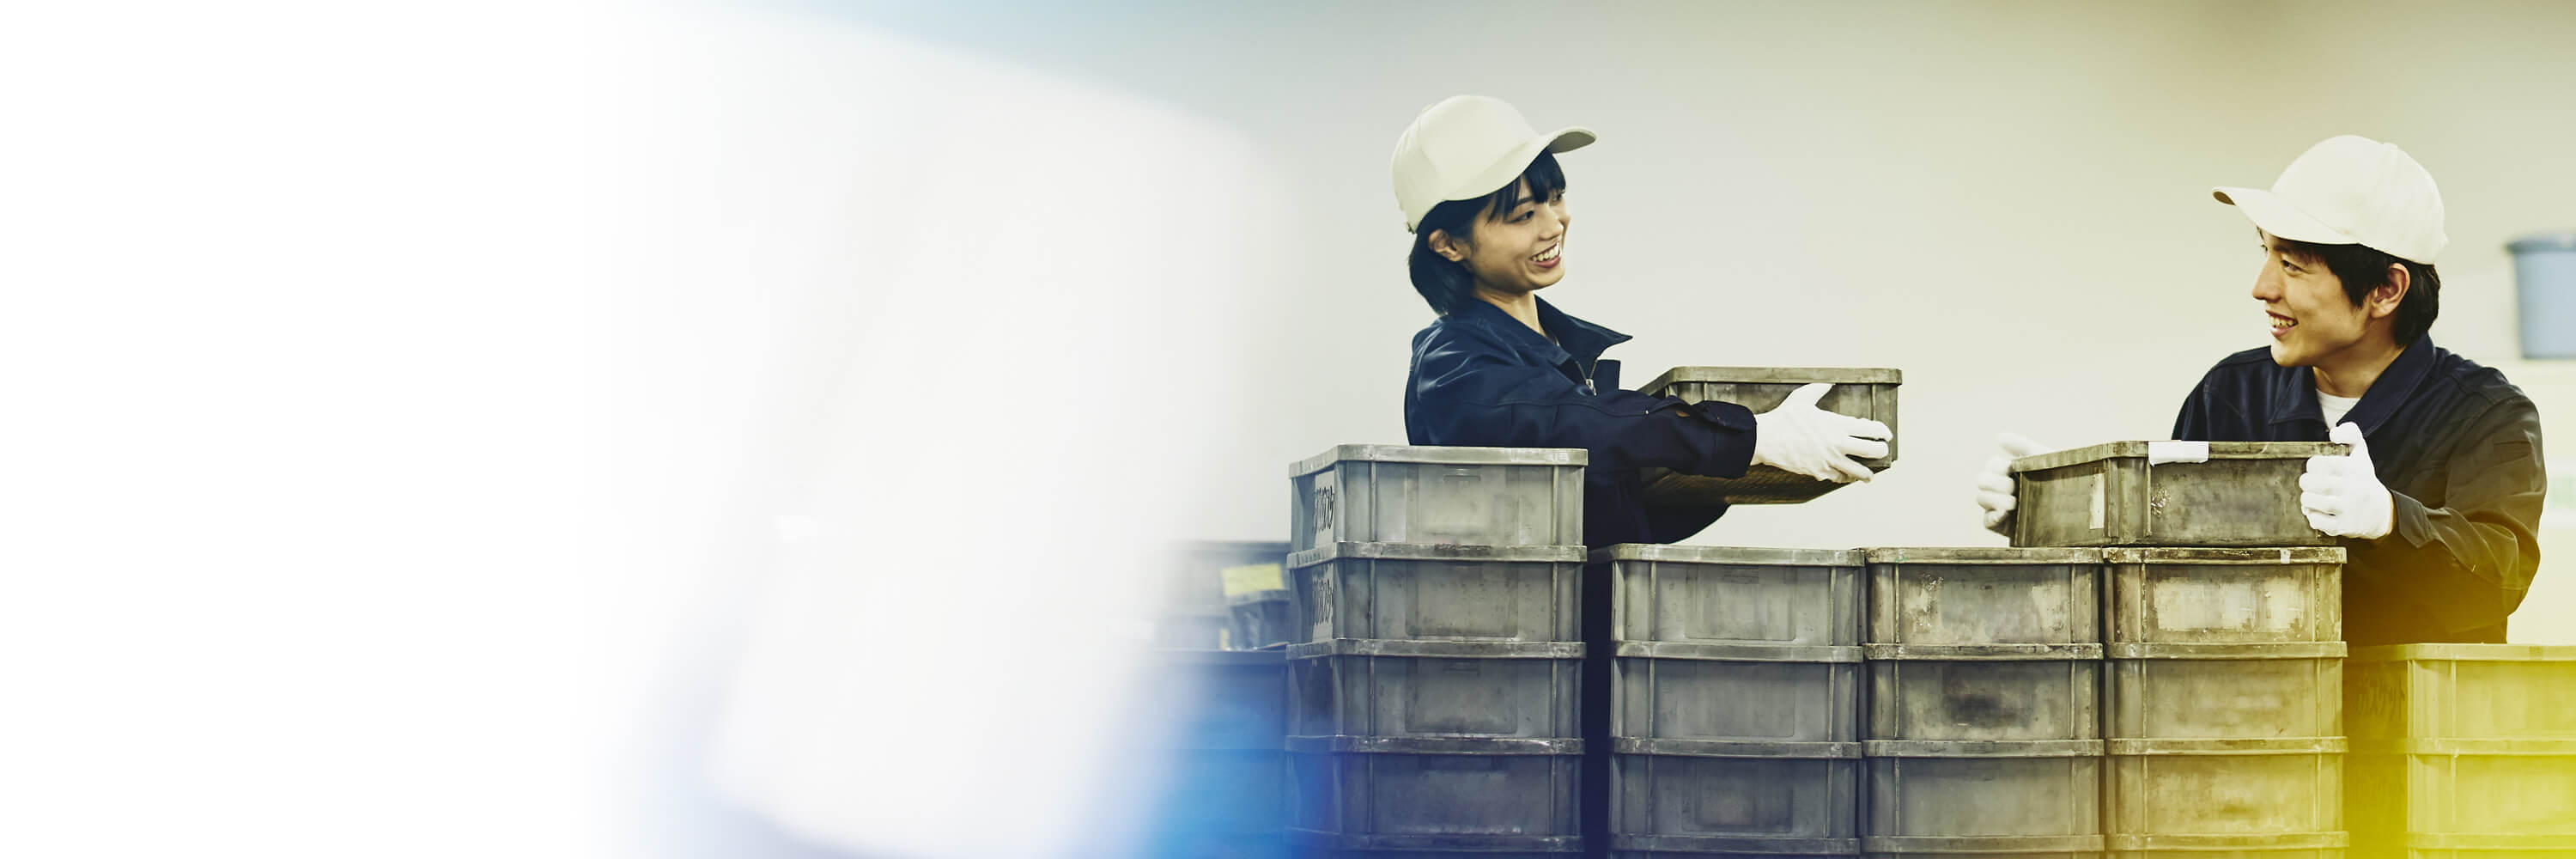 Two colleagues wearing white caps and safety gloves moving boxes in a warehouse.